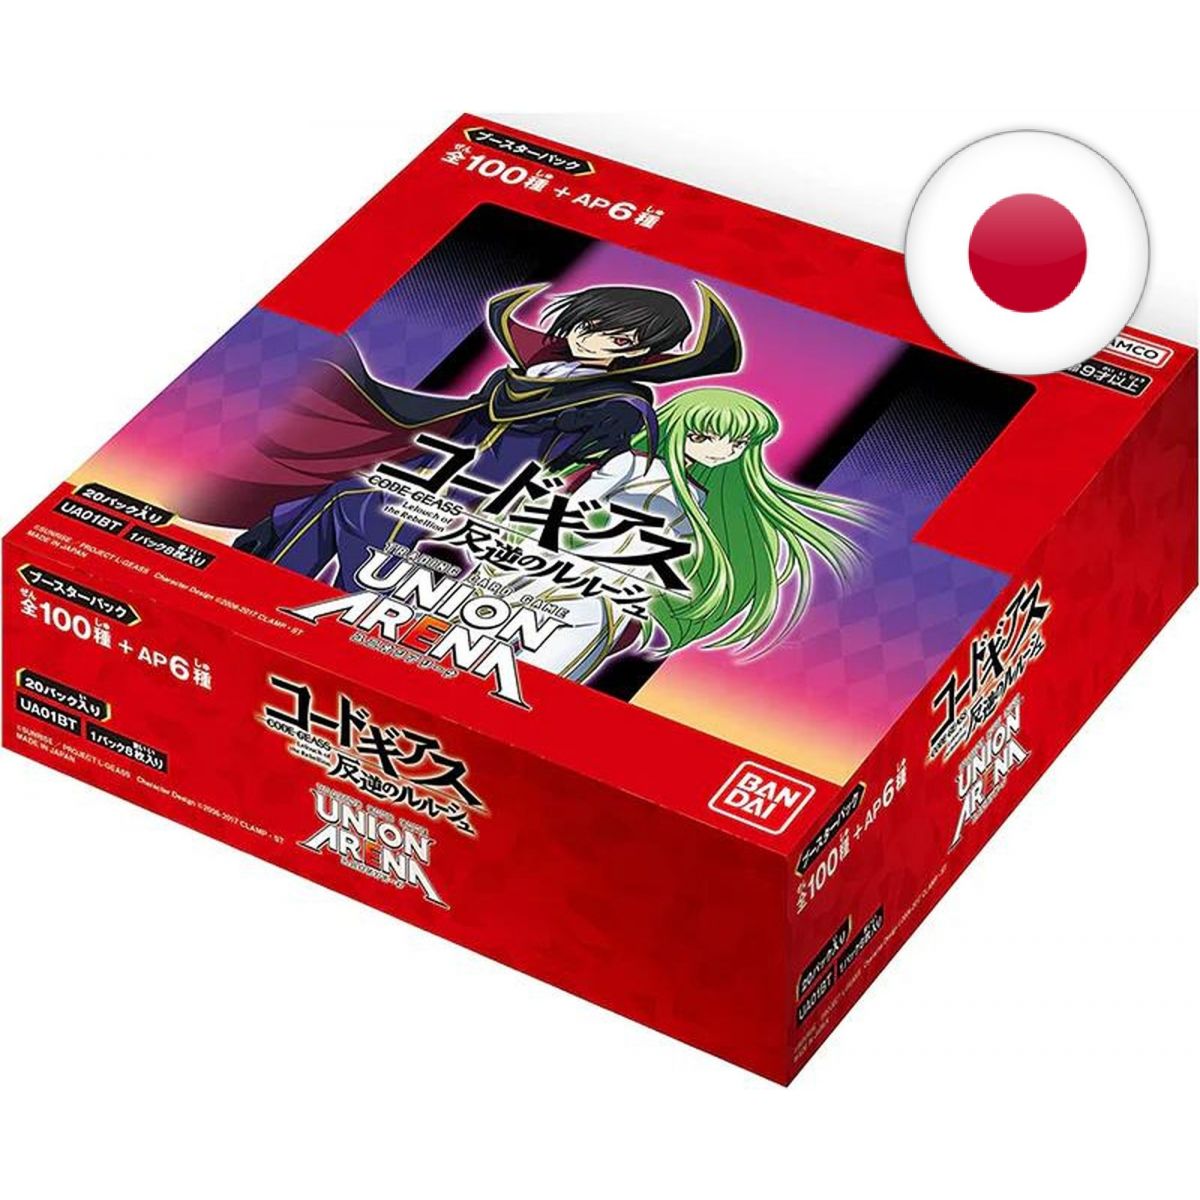 Union Arena - Display - Boite de 20 Boosters - Code Geass Lelouch of the Rebellion - JP